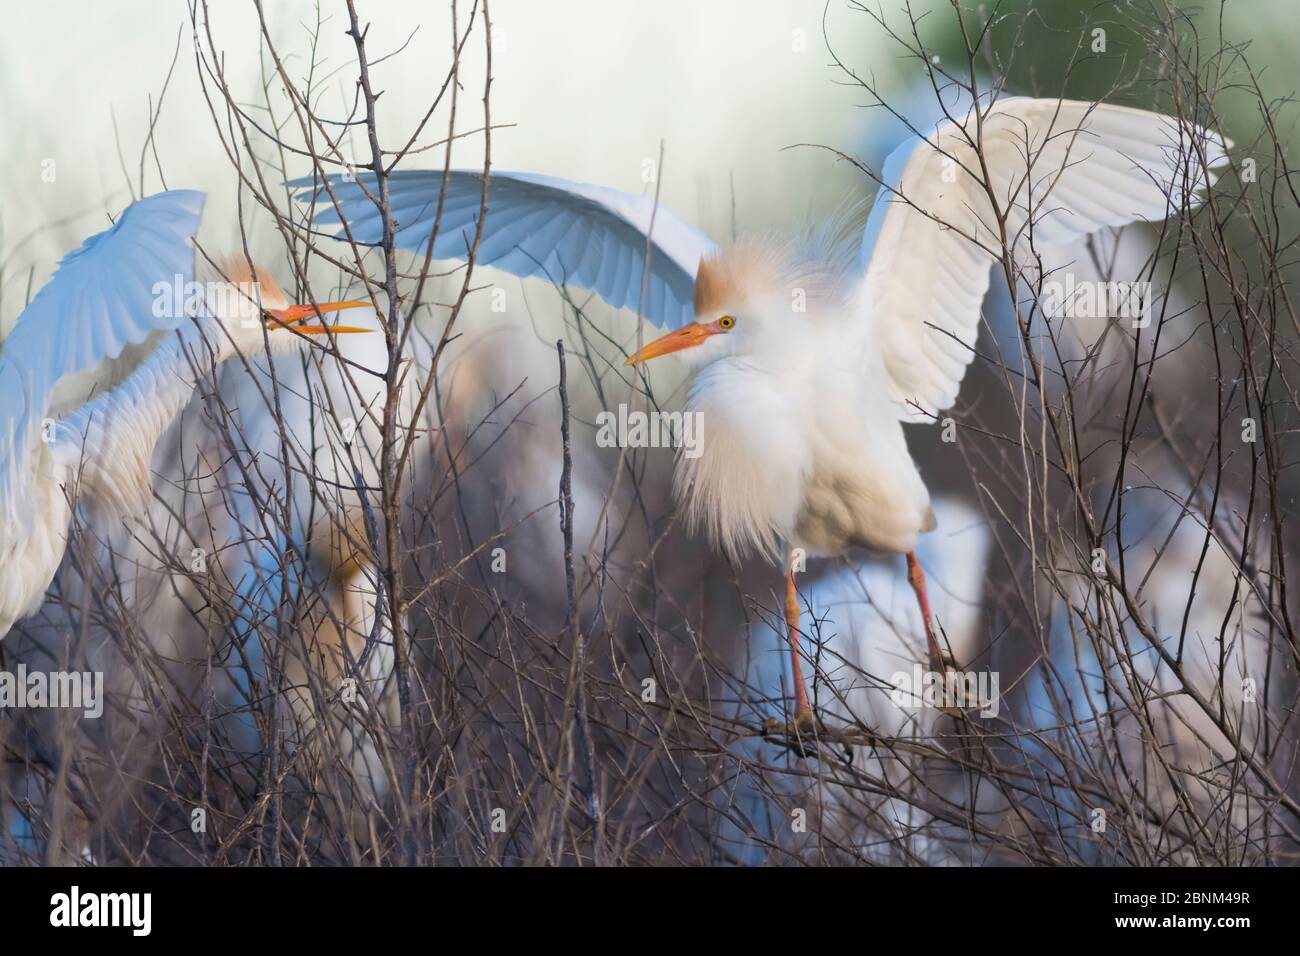 Cattle egret ((Bubulcus ibis) perched in heronry in tree. La Pampa , Argentina. Stock Photo